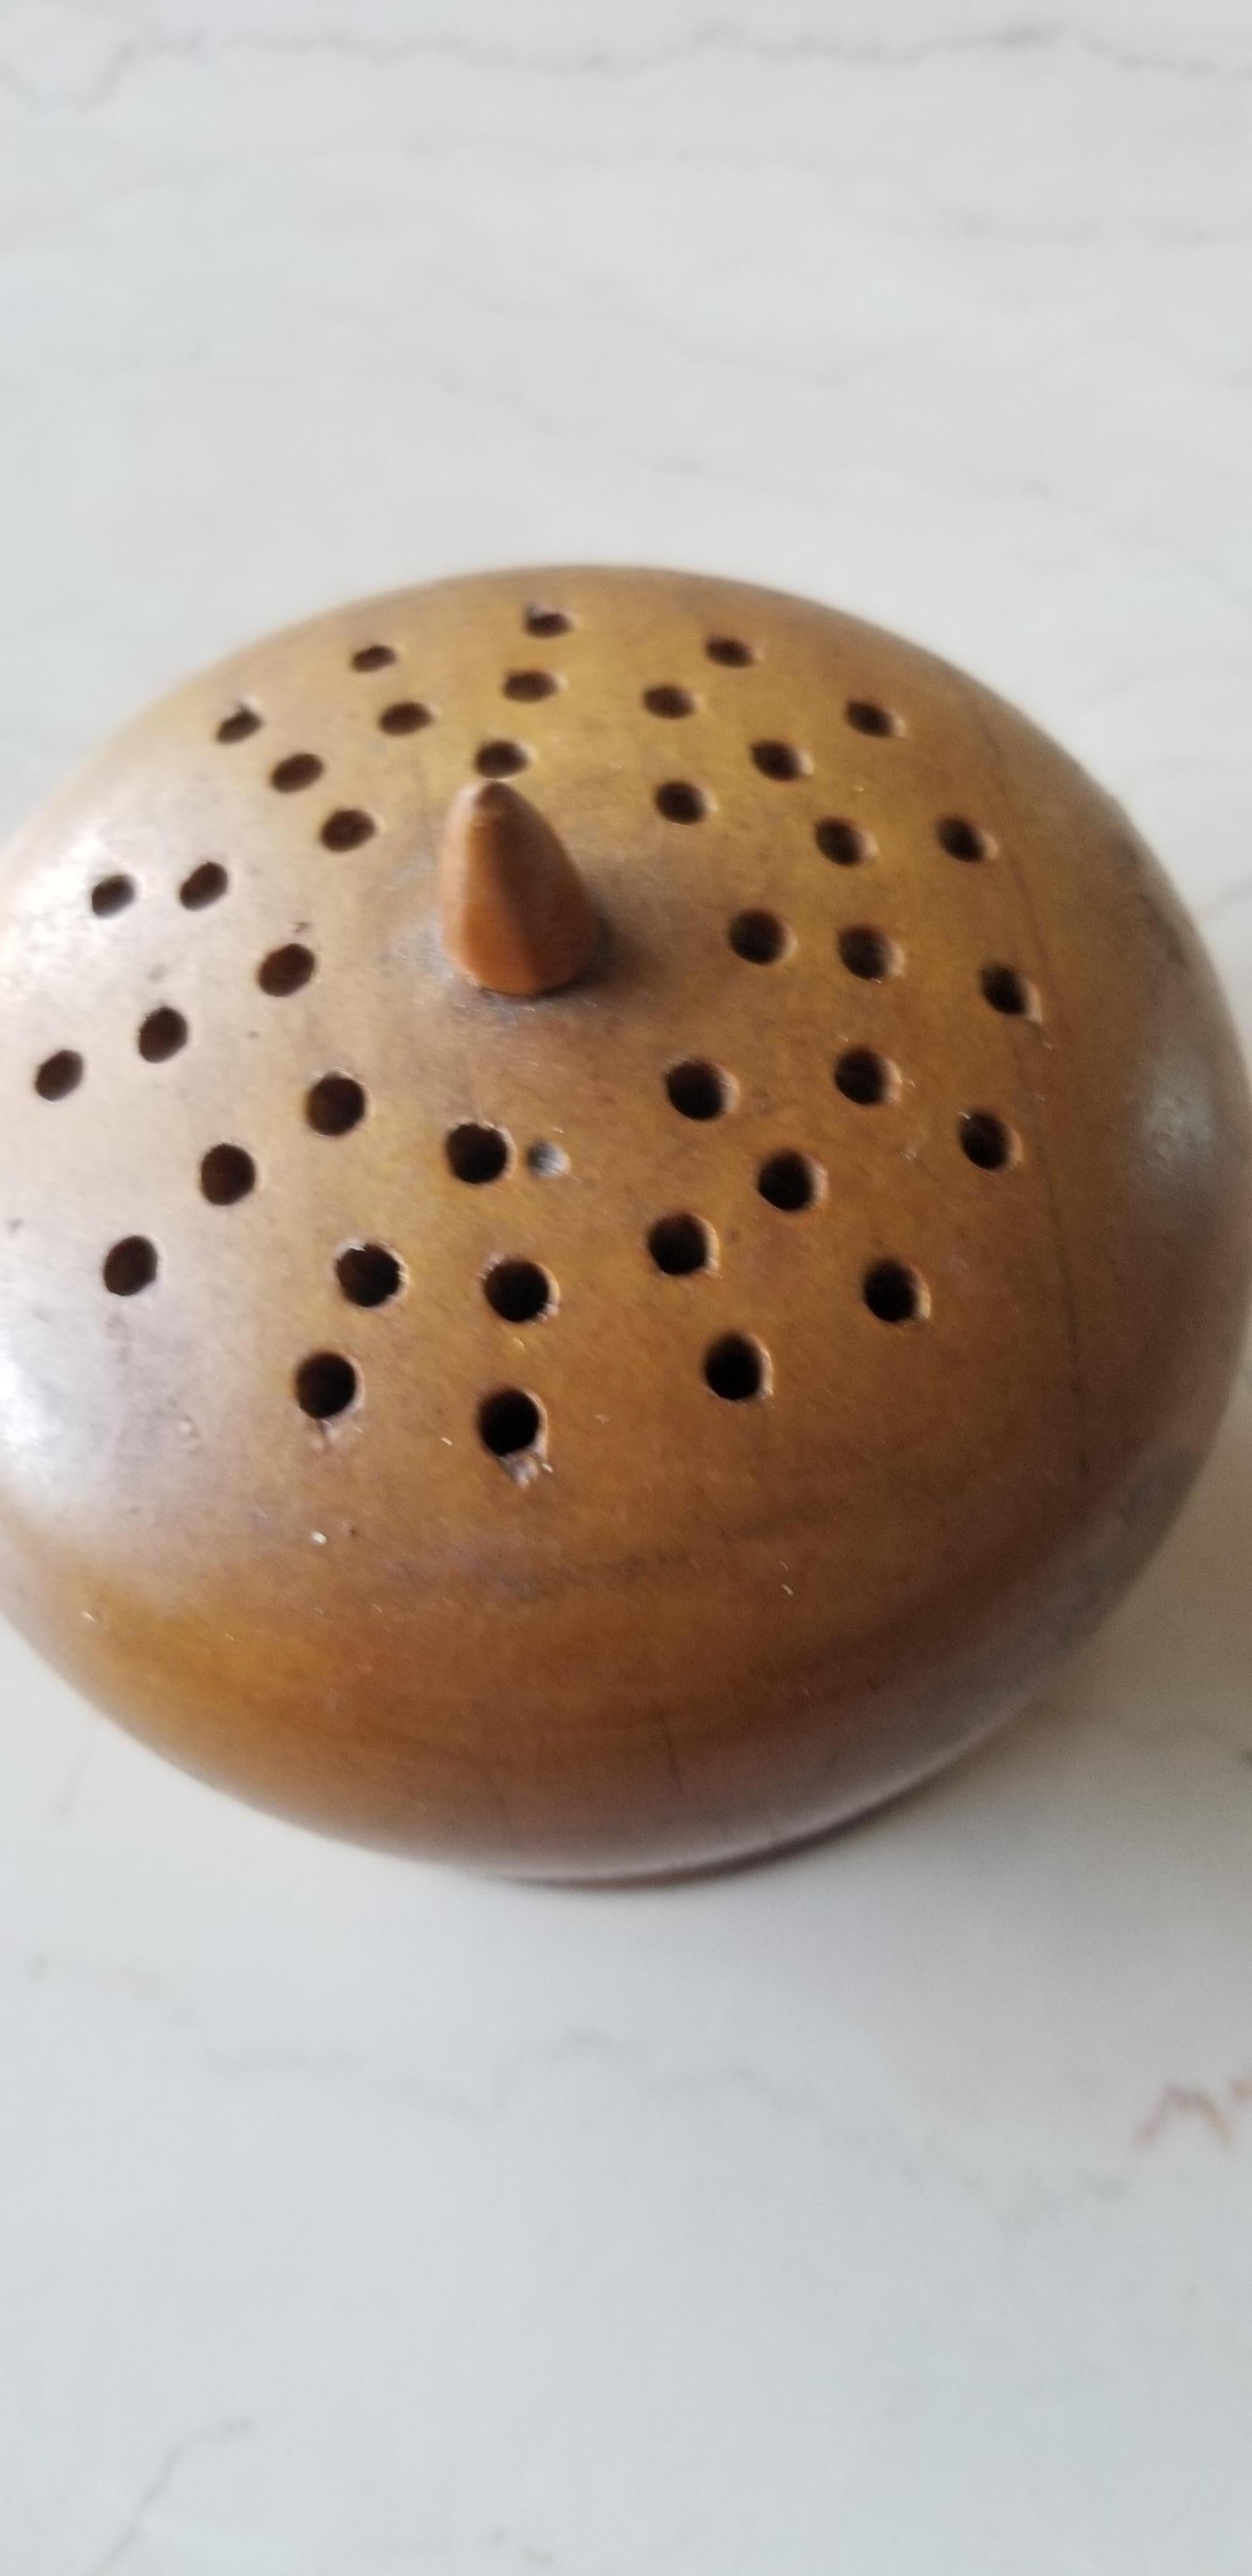 AMBIANIC presents
Hors d’oeuvre Appetizer Wood Toothpick Holder Atomic Sputnik Modern 1950s
Ideal Midcentury Modern Serving Piece for cheese cubes appetizer FUN!
approximately: 3.5Tall x 10 inches Diameter
Preowned Unrestored Original Vintage